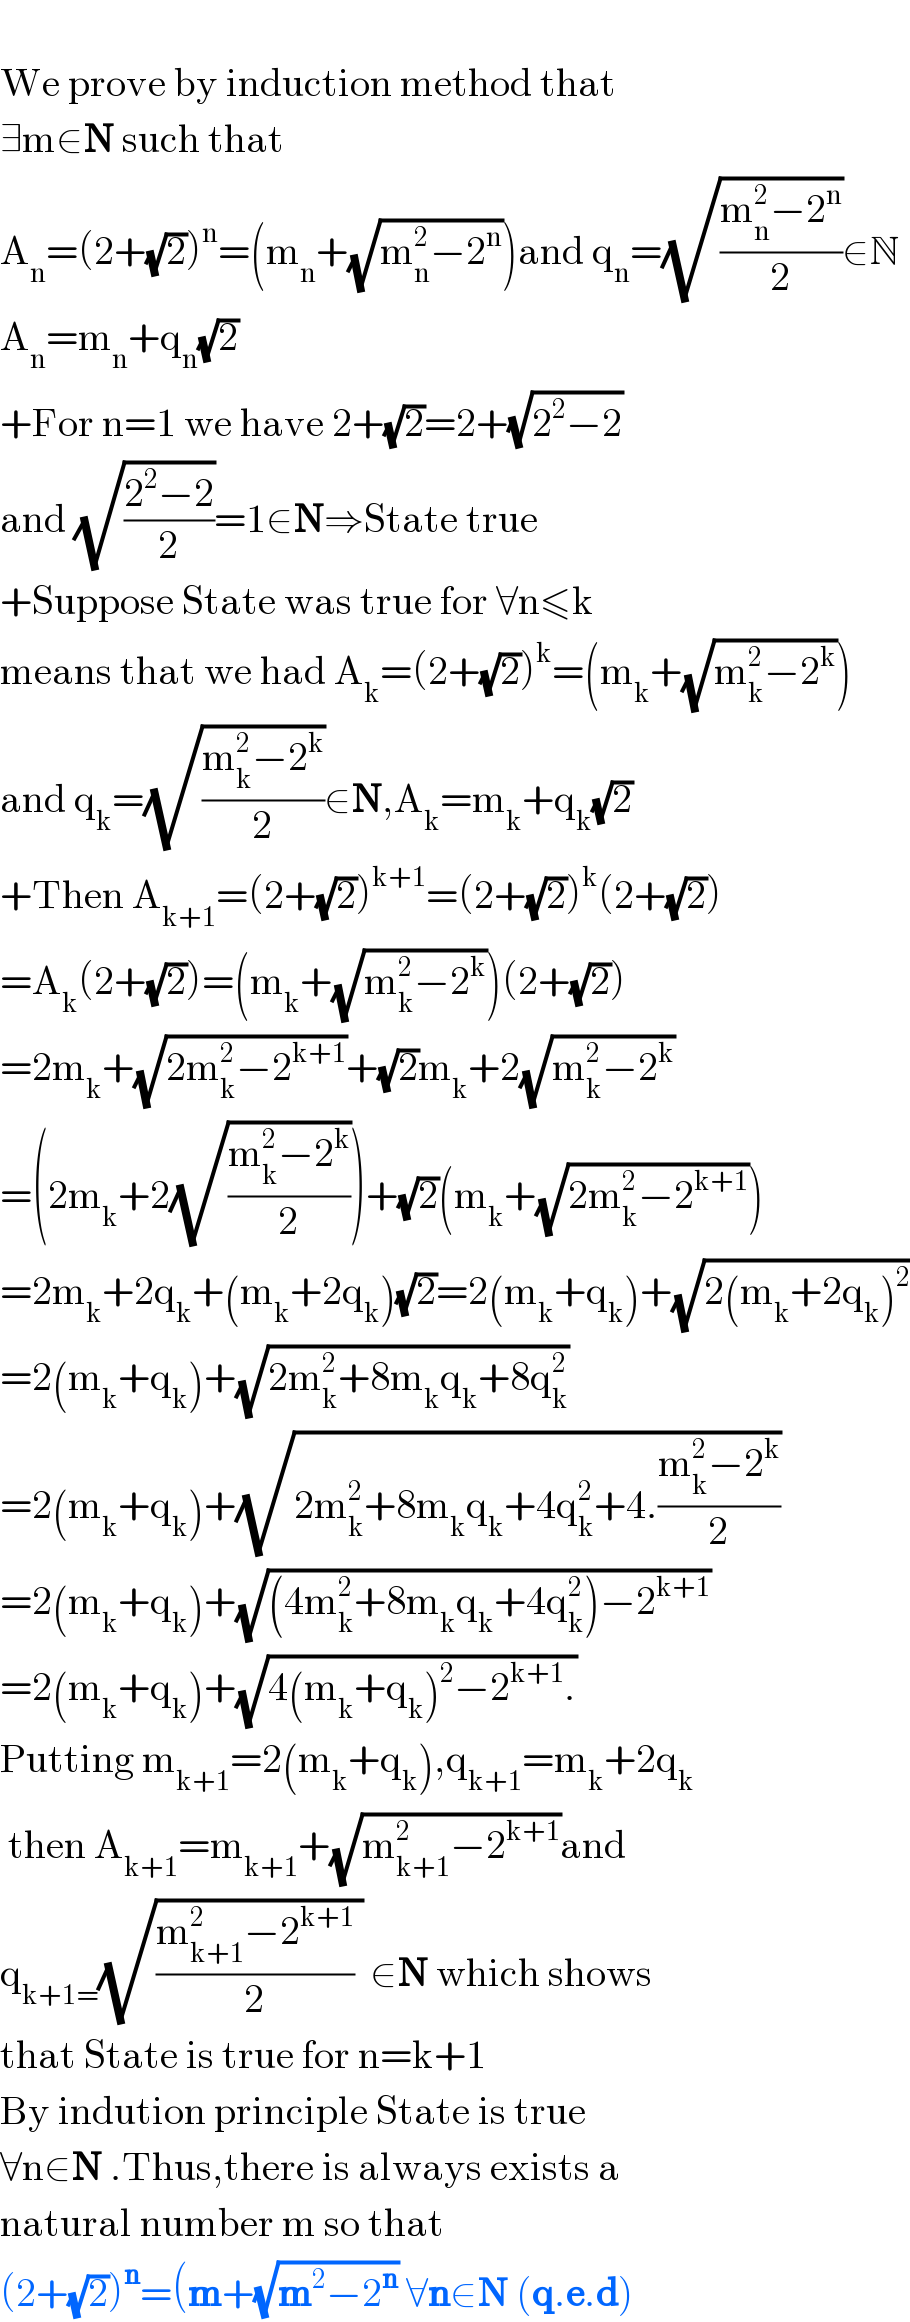   We prove by induction method that  ∃m∈N such that   A_n =(2+(√2))^n =(m_n +(√(m_n ^2 −2^n )))and q_n =(√((m_n ^2 −2^n )/2))∈N  A_n =m_n +q_n (√2)  +For n=1 we have 2+(√2)=2+(√(2^2 −2))  and (√((2^2 −2)/2))=1∈N⇒State true  +Suppose State was true for ∀n≤k  means that we had A_k =(2+(√2))^k =(m_k +(√(m_k ^2 −2^k )))  and q_k =(√((m_k ^2 −2^k )/2))∈N,A_k =m_k +q_k (√2)  +Then A_(k+1) =(2+(√2))^(k+1) =(2+(√2))^k (2+(√2))  =A_k (2+(√2))=(m_k +(√(m_k ^2 −2^k )))(2+(√2))  =2m_k +(√(2m_k ^2 −2^(k+1) ))+(√2)m_k +2(√(m_k ^2 −2^k ))  =(2m_k +2(√((m_k ^2 −2^k )/2)))+(√2)(m_k +(√(2m_k ^2 −2^(k+1) )))  =2m_k +2q_k +(m_k +2q_k )(√2)=2(m_k +q_k )+(√(2(m_k +2q_k )^2 ))  =2(m_k +q_k )+(√(2m_k ^2 +8m_k q_k +8q_k ^2 ))  =2(m_k +q_k )+(√(2m_k ^2 +8m_k q_k +4q_k ^2 +4.((m_k ^2 −2^k )/2)))  =2(m_k +q_k )+(√((4m_k ^2 +8m_k q_k +4q_k ^2 )−2^(k+1) ))  =2(m_k +q_k )+(√(4(m_k +q_k )^2 −2^(k+1) .))  Putting m_(k+1) =2(m_k +q_k ),q_(k+1) =m_k +2q_k    then A_(k+1) =m_(k+1) +(√(m_(k+1) ^2 −2^(k+1) ))and   q_(k+1=) (√(((m_(k+1) ^2 −2^(k+1) )/2) )) ∈N which shows  that State is true for n=k+1  By indution principle State is true   ∀n∈N .Thus,there is always exists a  natural number m so that  (2+(√2))^n =(m+(√(m^2 −2^n )) ∀n∈N (q.e.d)  